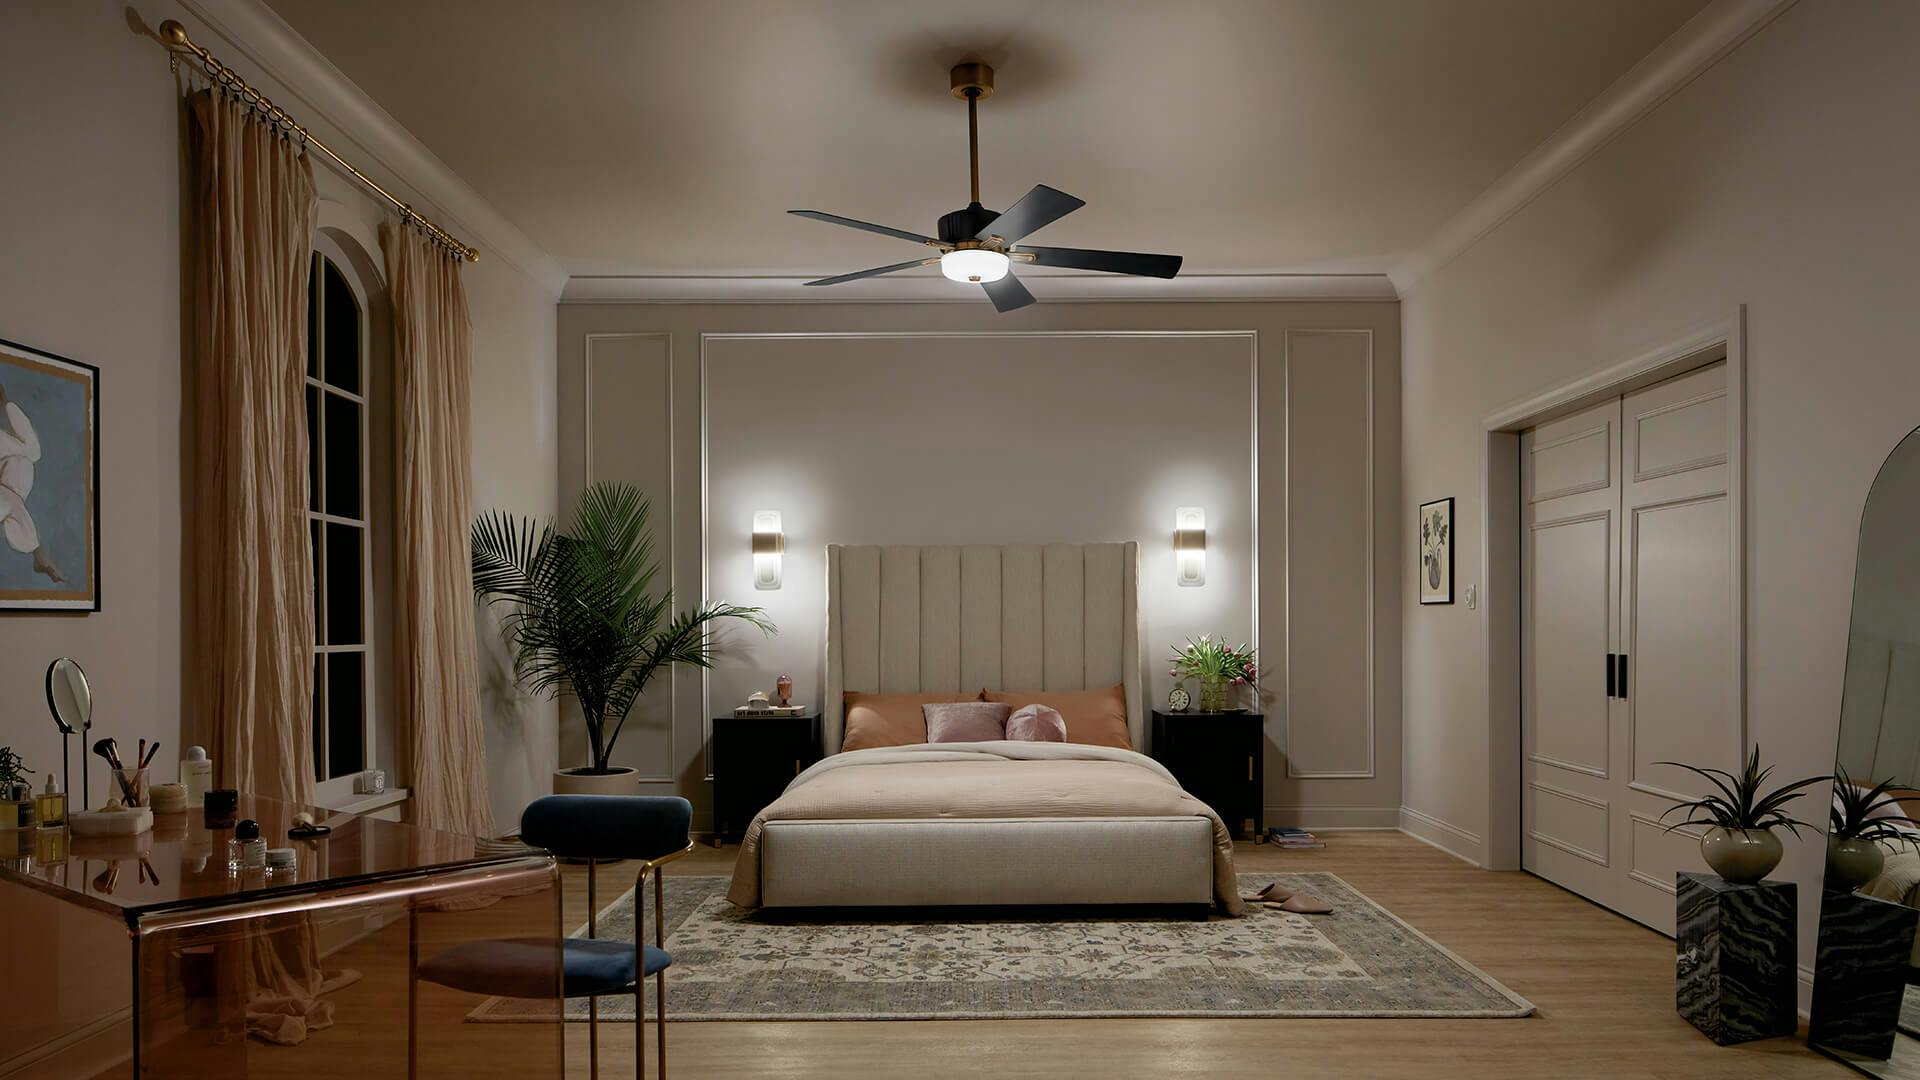 Expansive bedroom at night lit by two sconces on each side of the bed with a central Icon ceiling fan